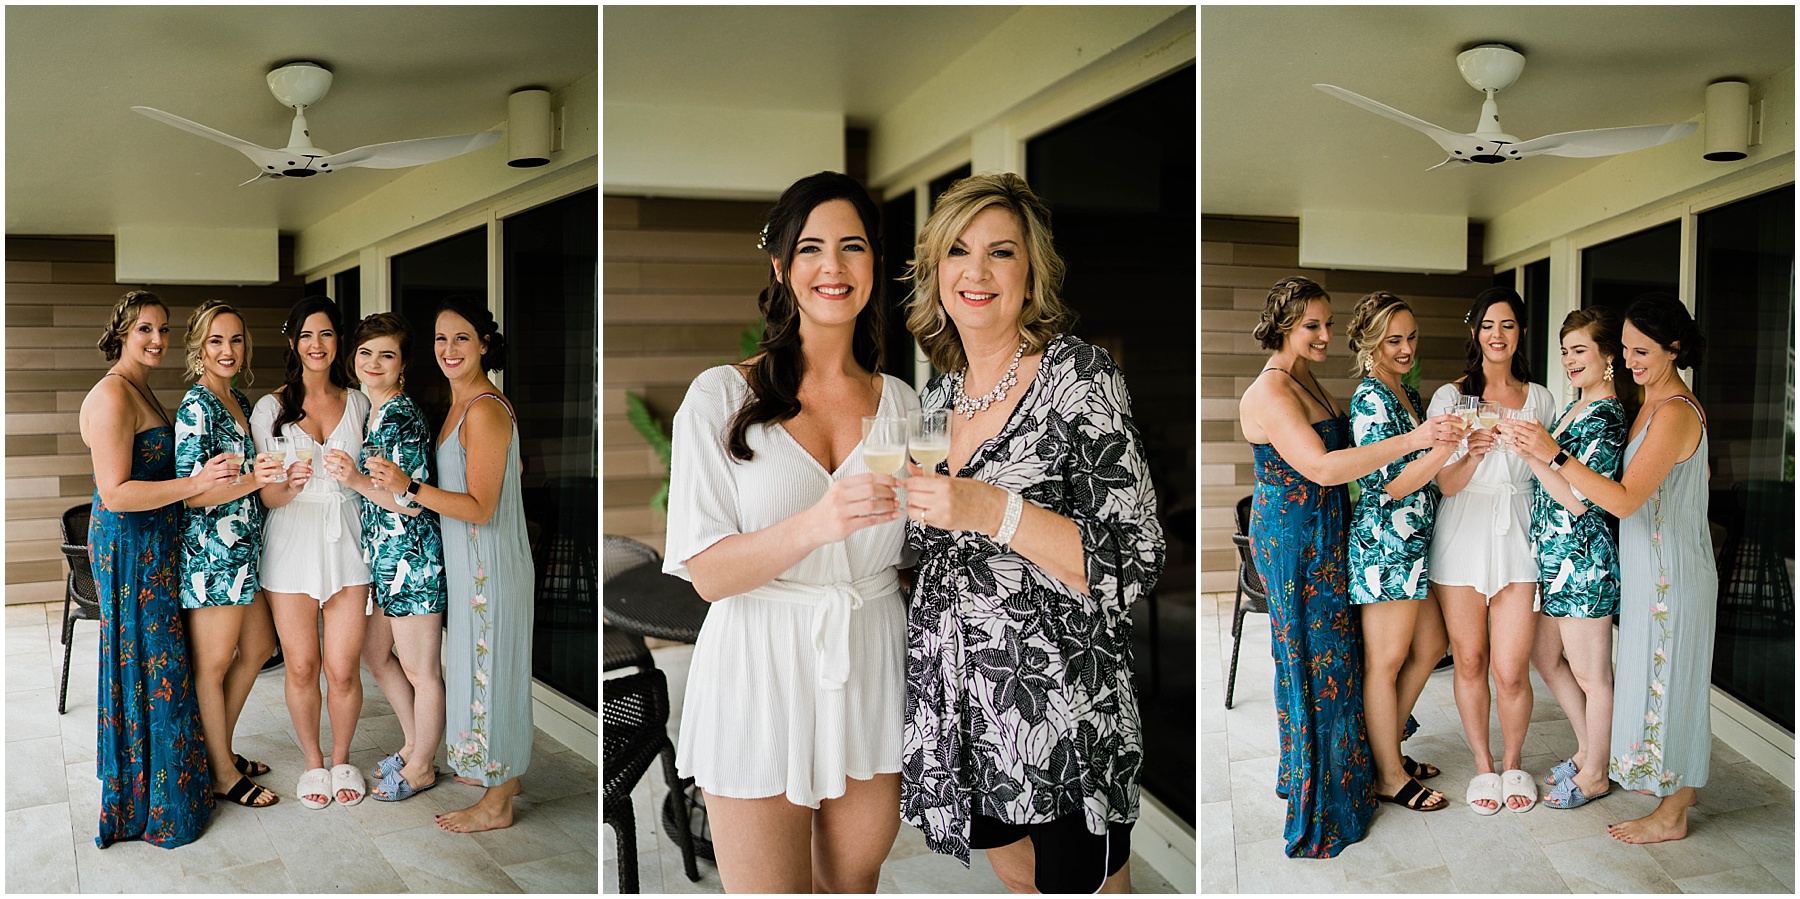 Bride and bridesmaids toast champagne on wedding day at JW Marriott Marco Island in Florida.